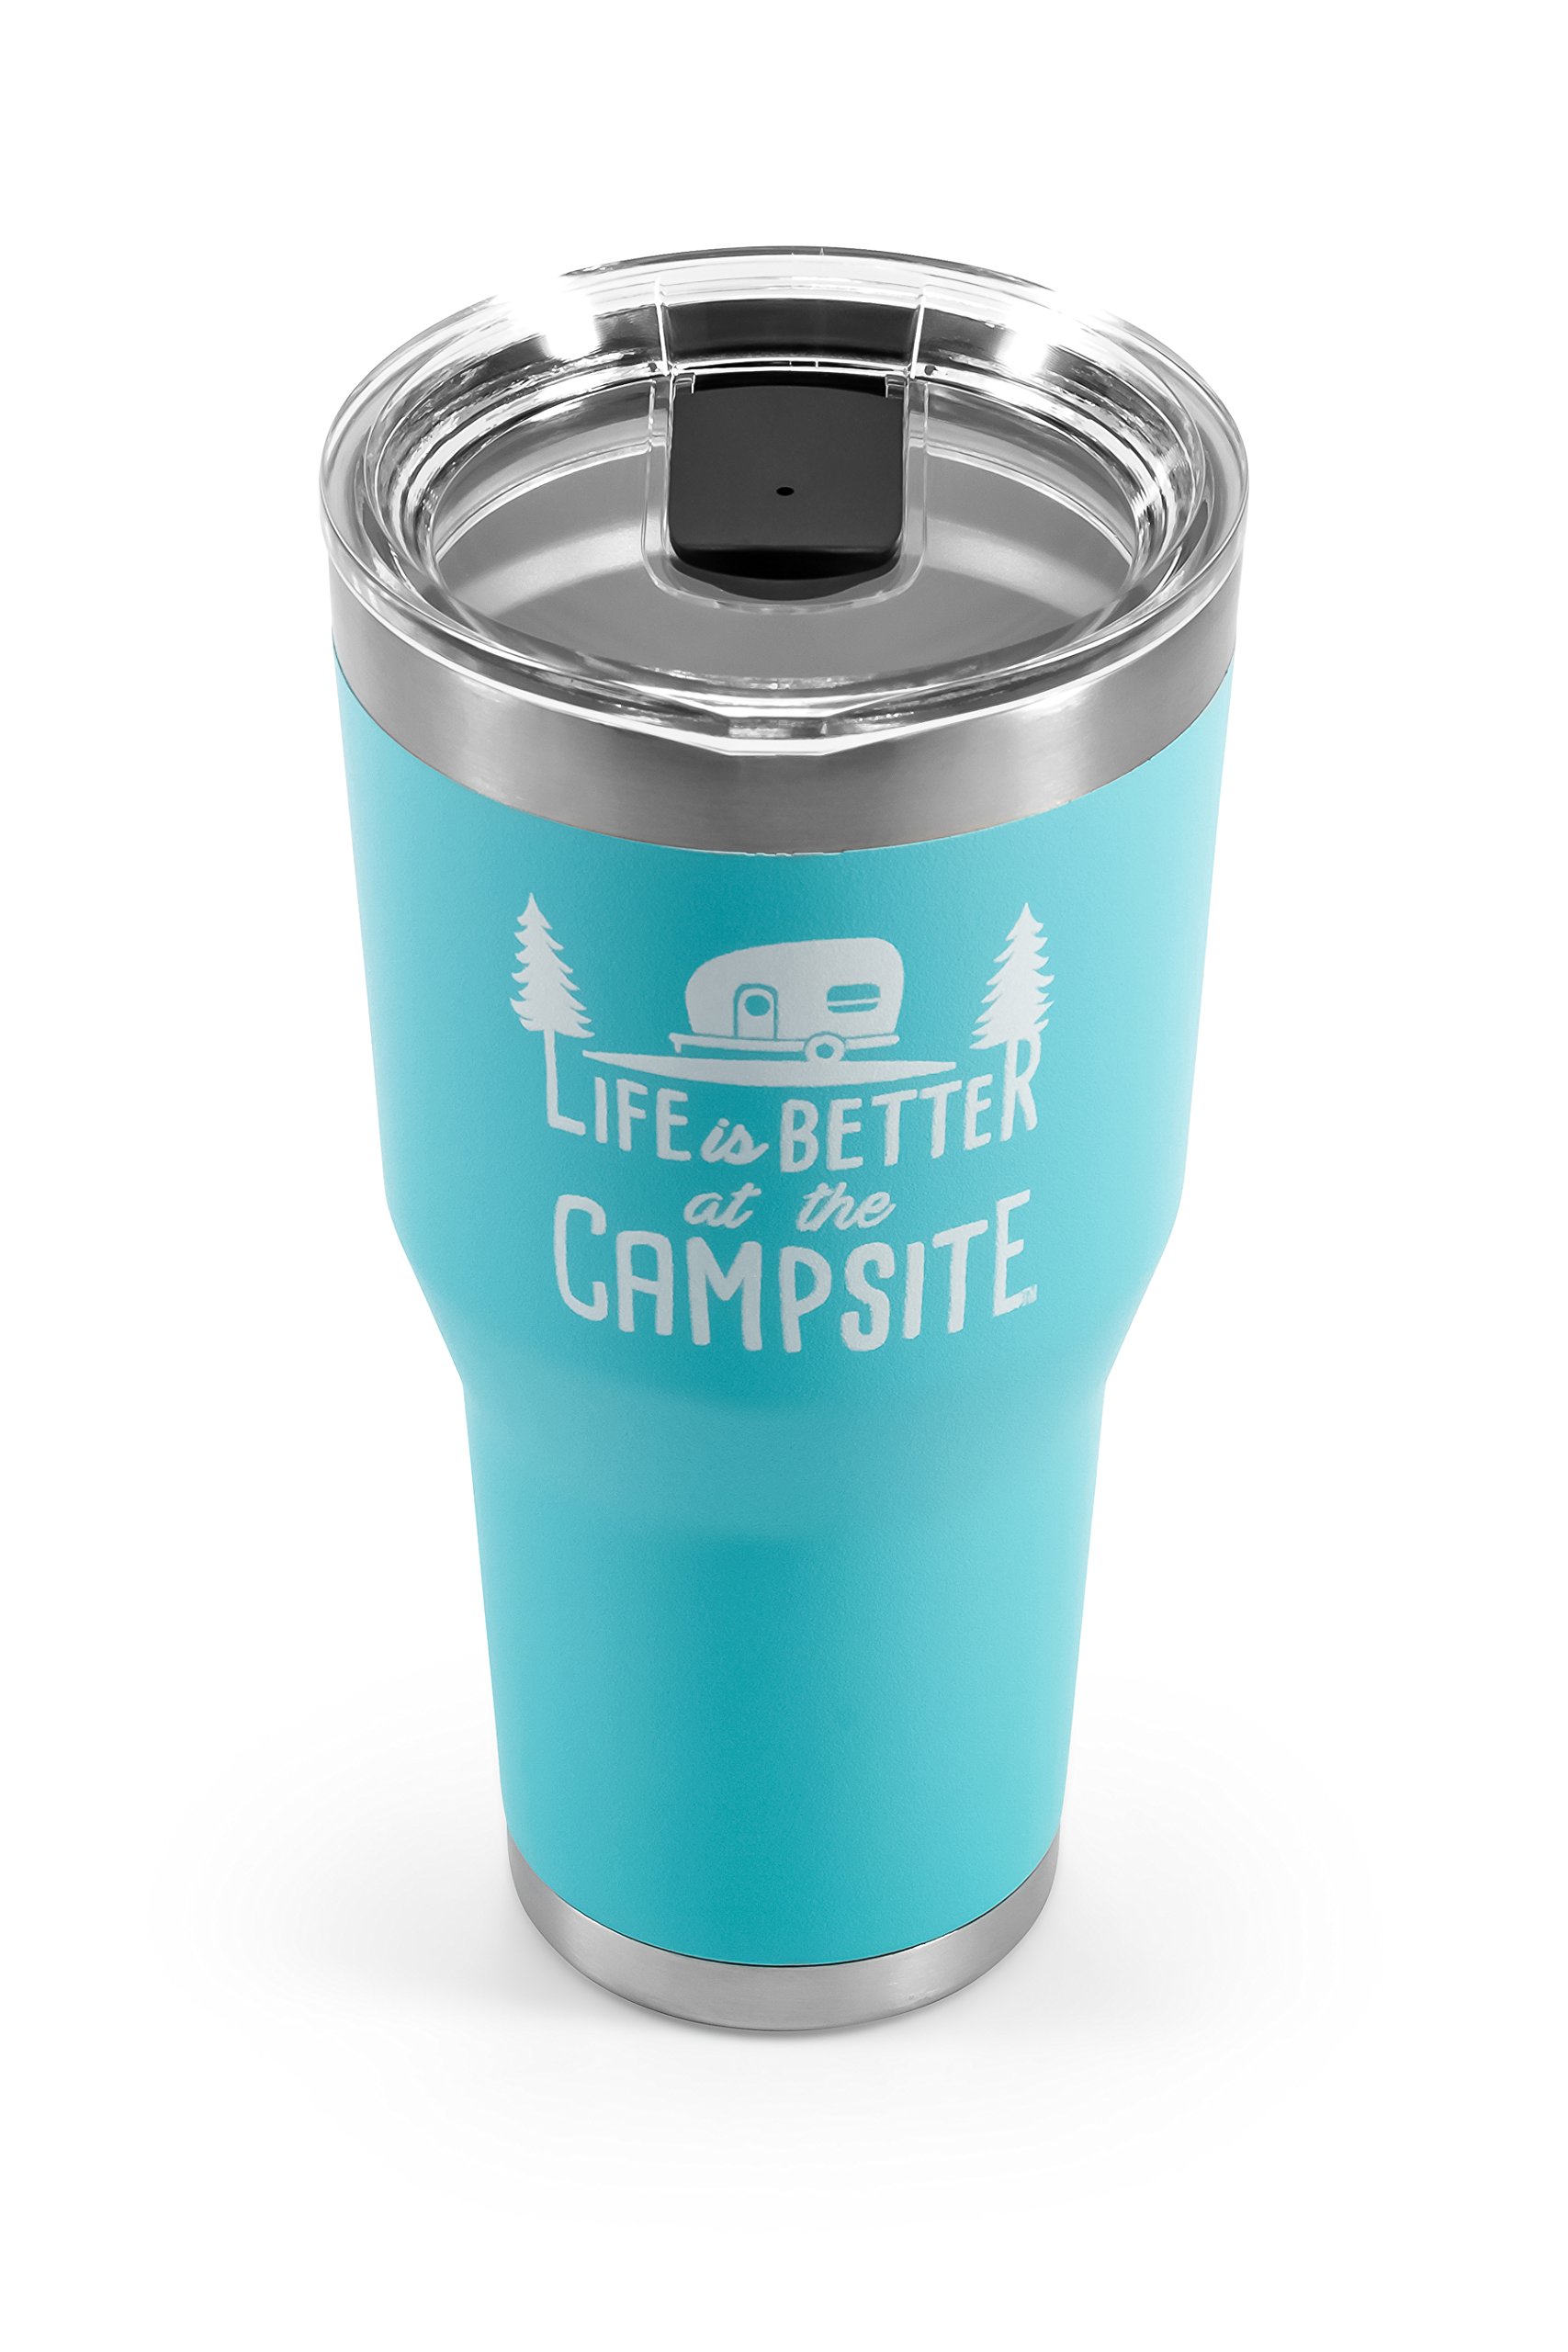 30-Oz Camco Life is Better at The Campsite Stainless Steel Tumbler w/ Double Wall Insulation (Cool Blue)  $7.92 + Free Shipping w/ Prime or on $35+